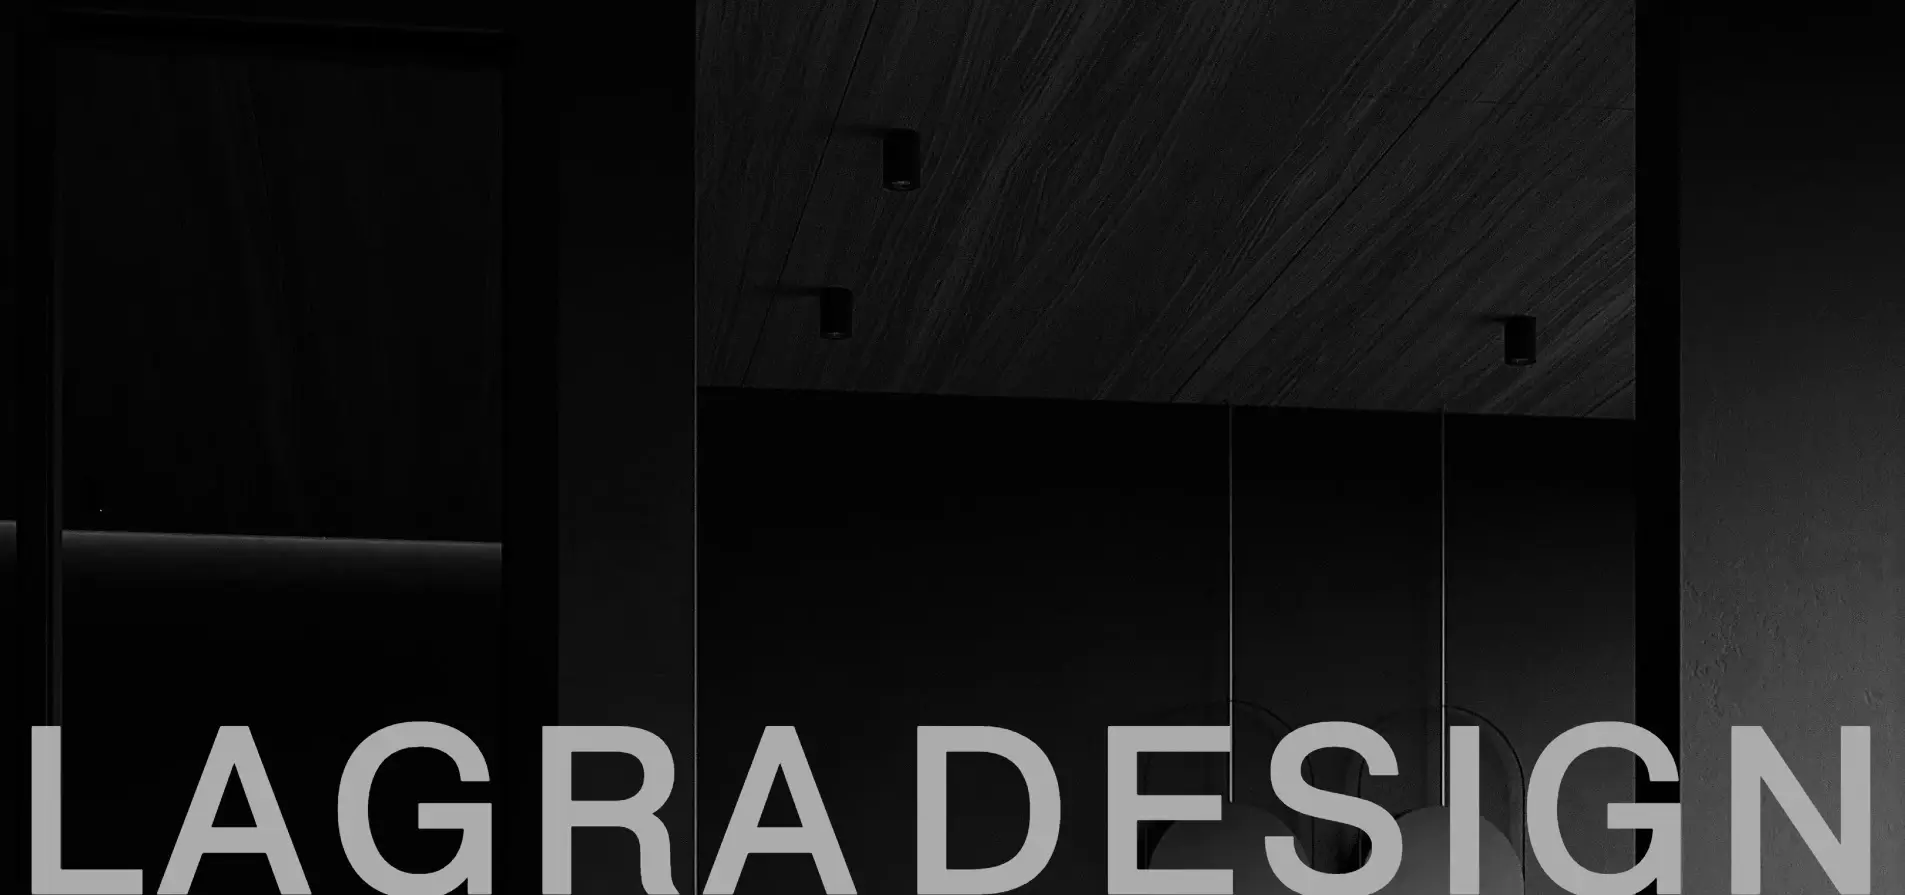 Dark, stylish website showcasing interior design expertise with a focus on performance and aesthetics